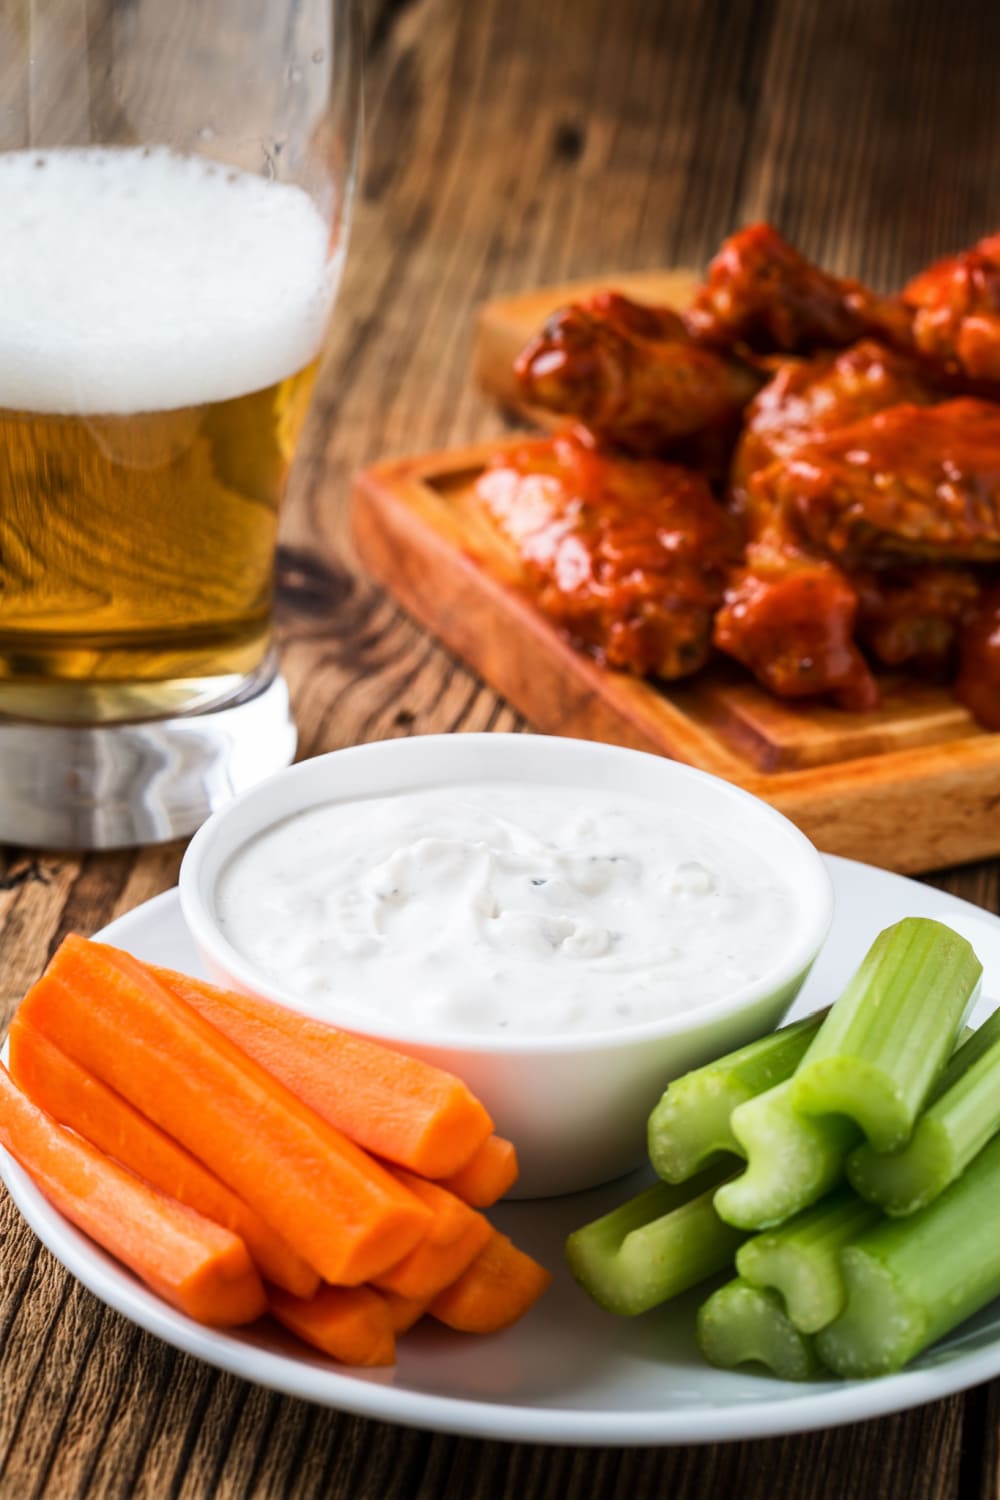 Buffalo Chicken Wings with Beer, Celery, Carrots and Dip